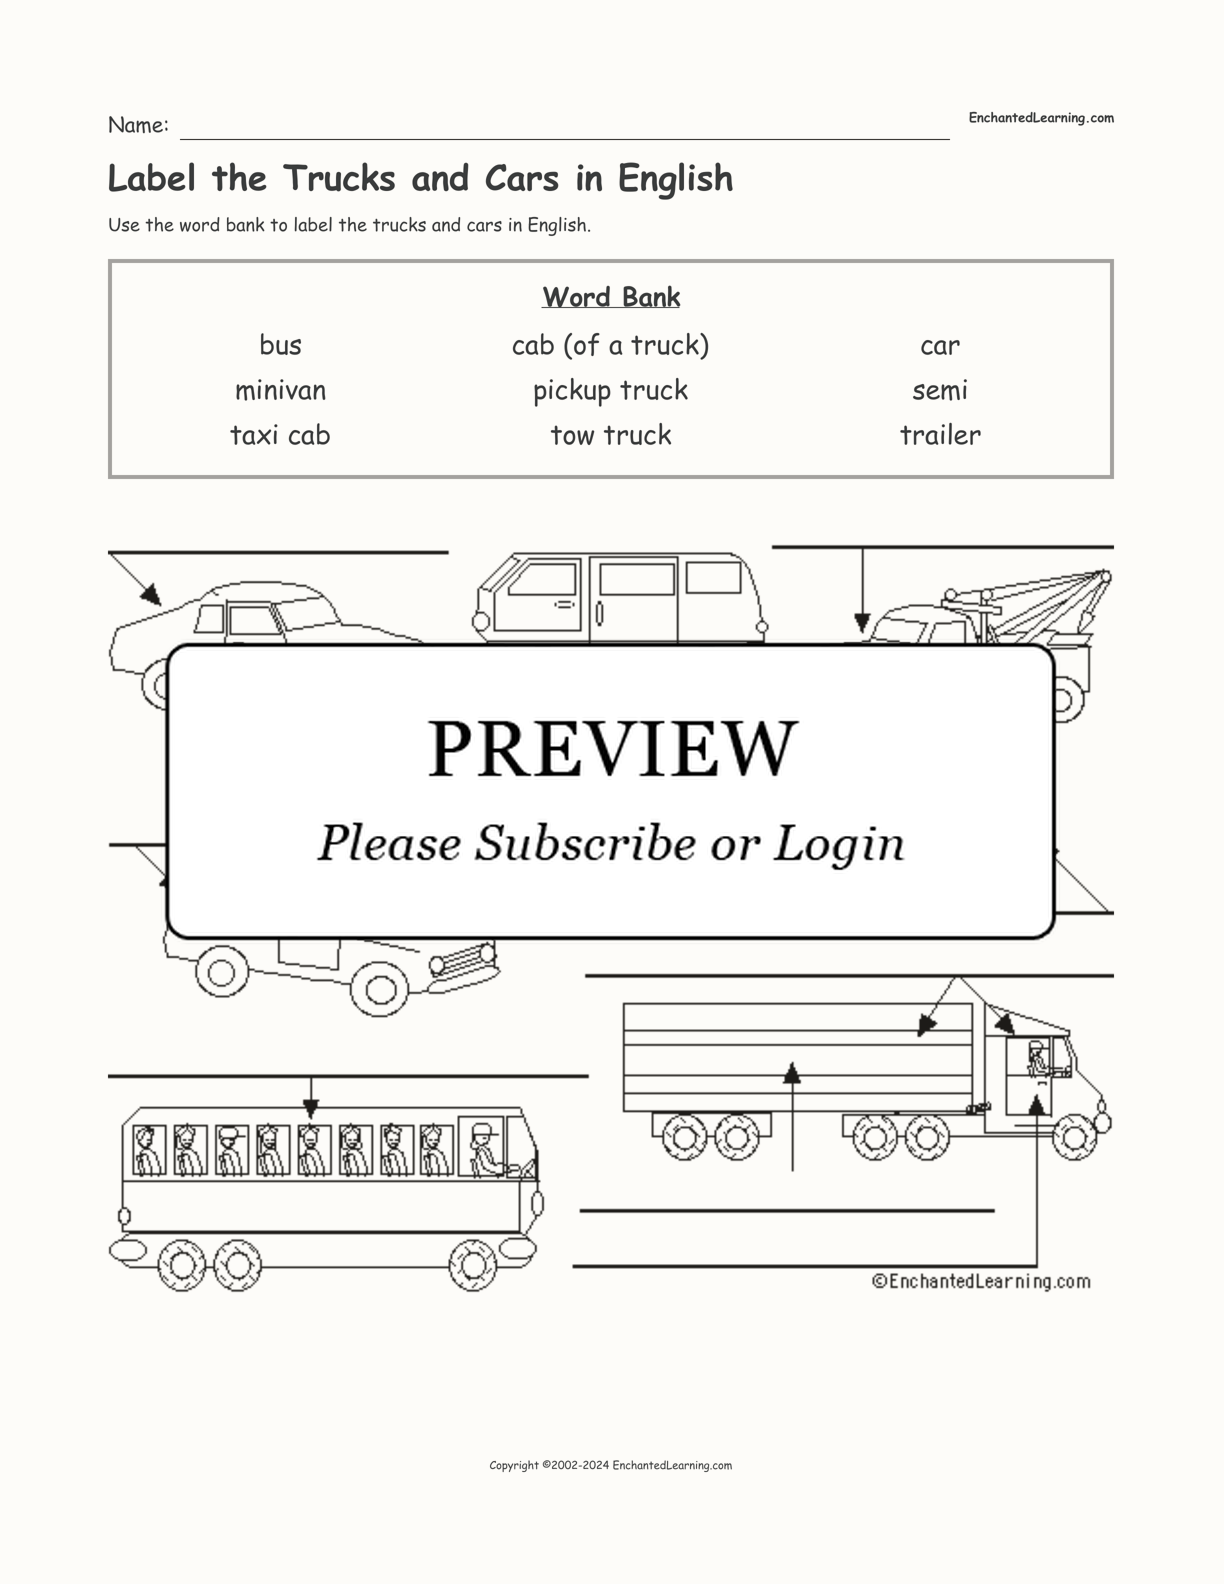 Label the Trucks and Cars in English interactive worksheet page 1